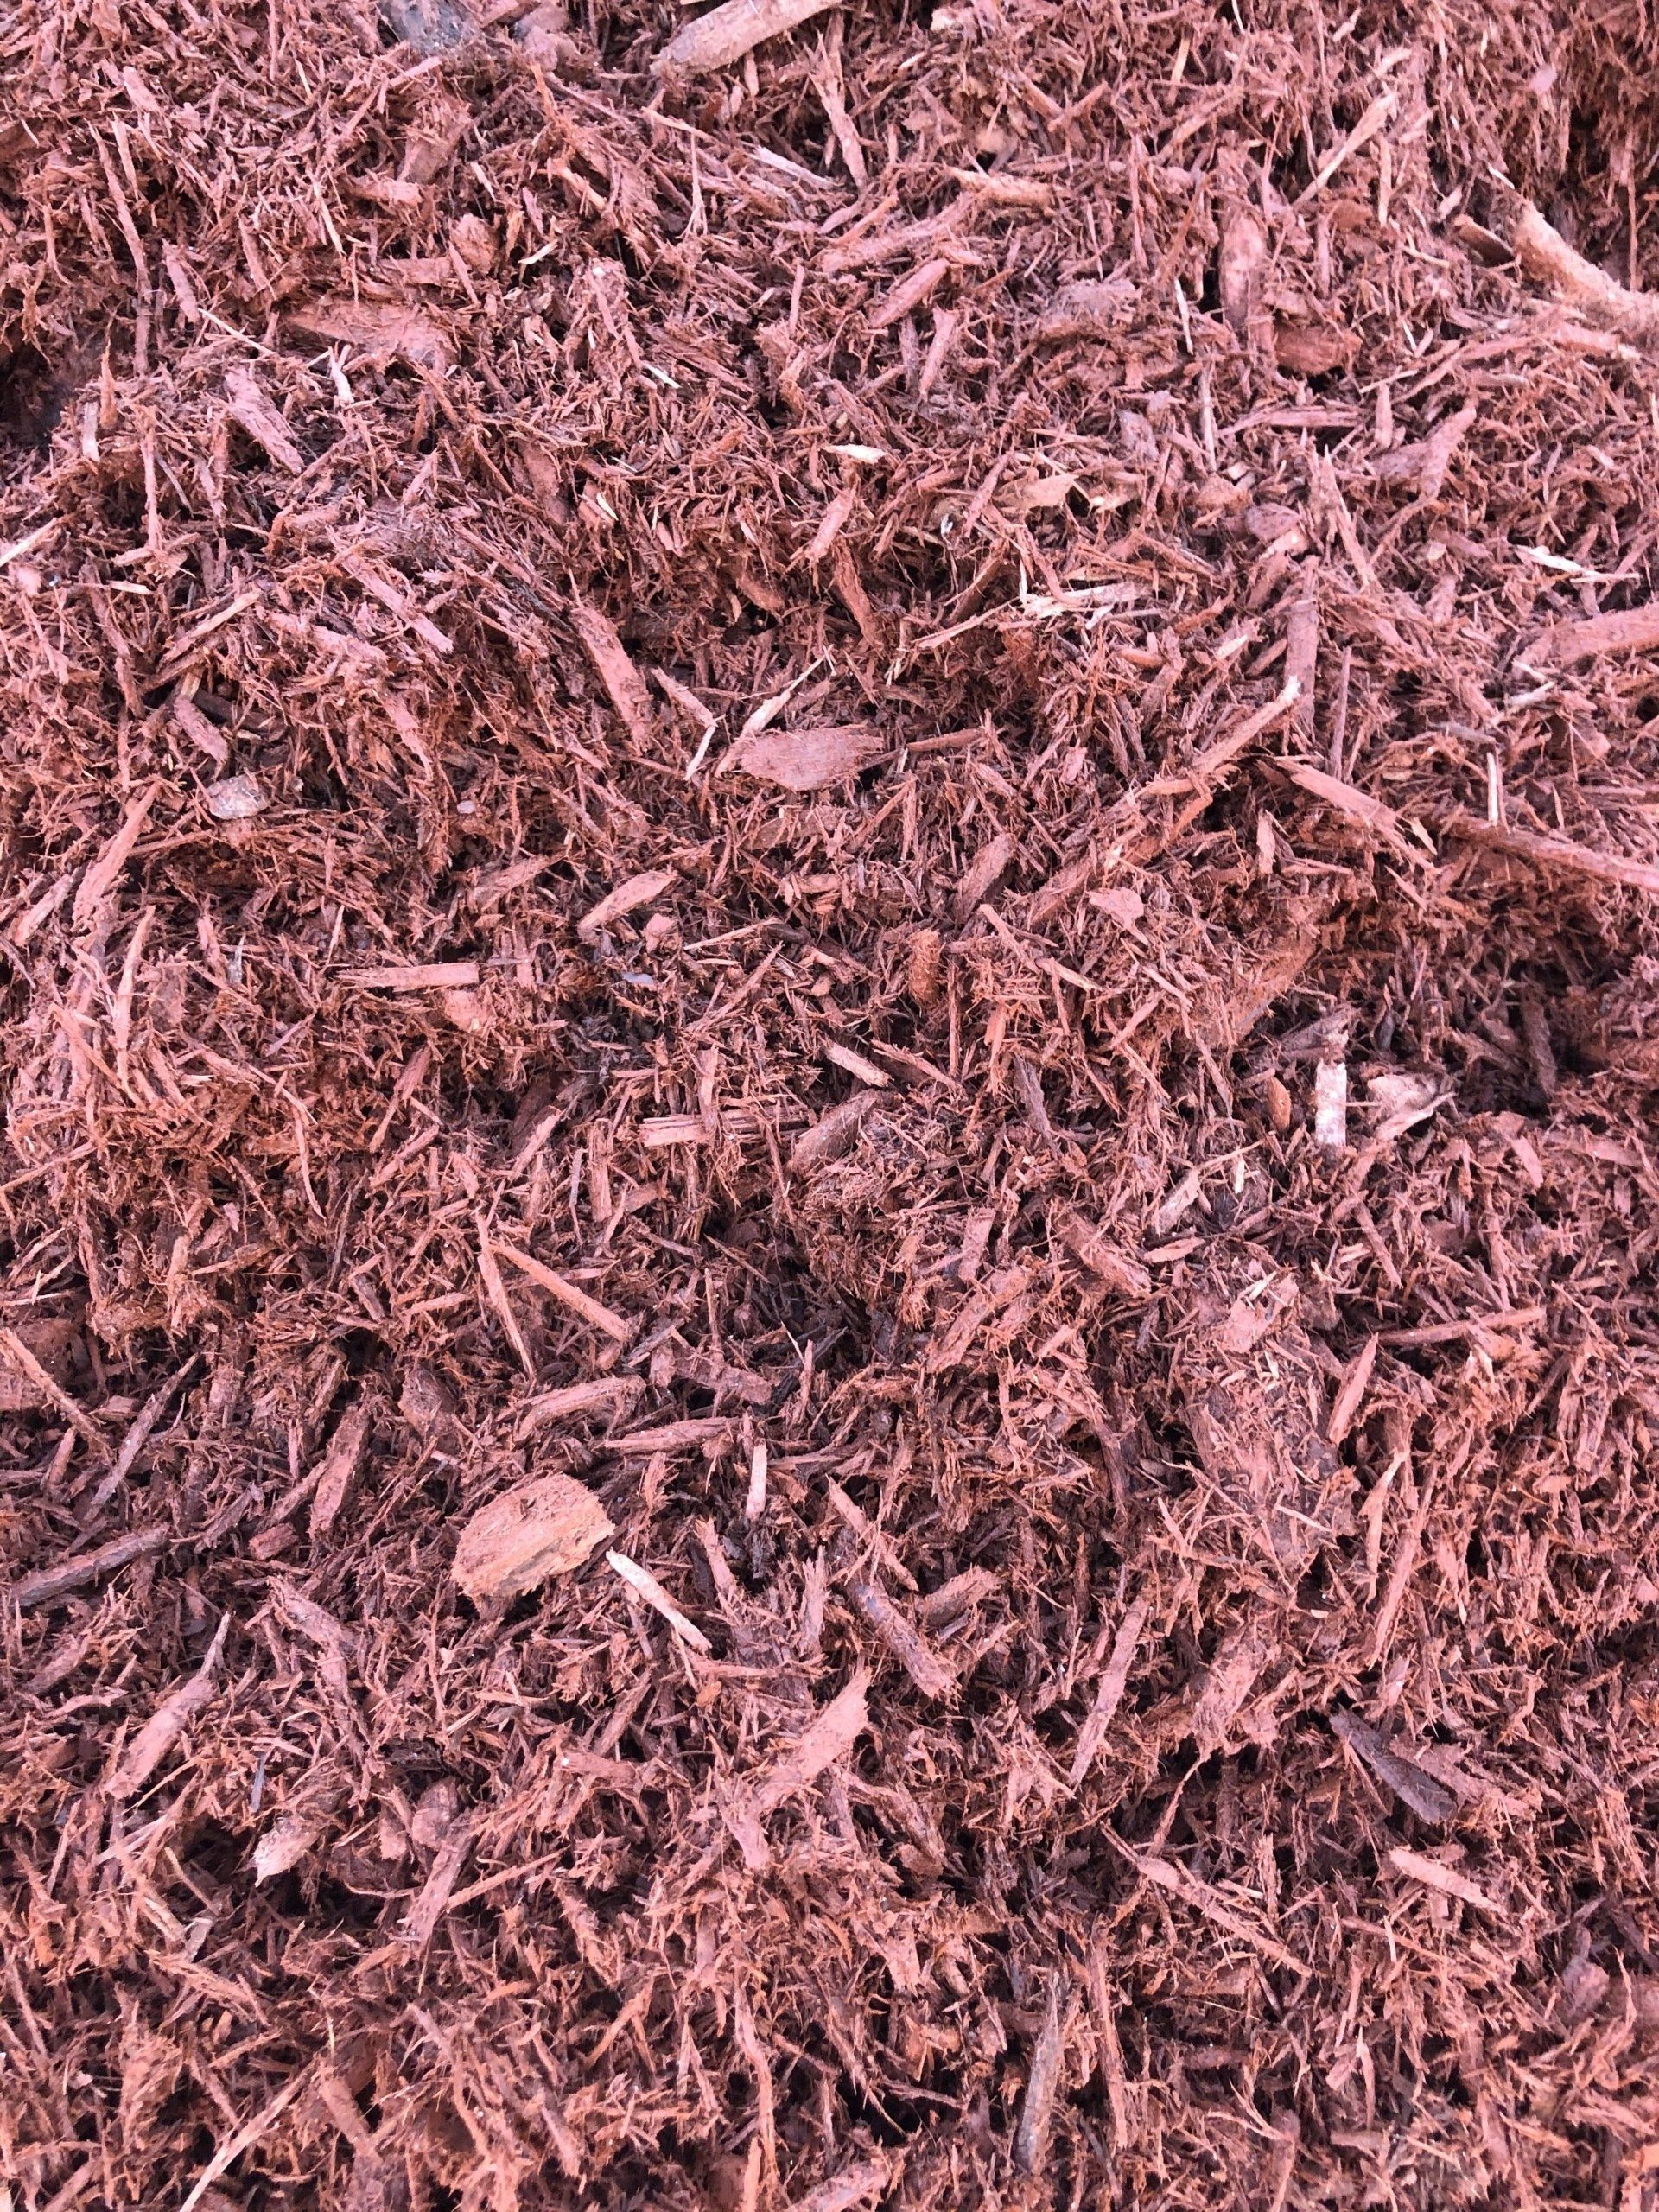 Red Mulch - Mulch Products in Florida